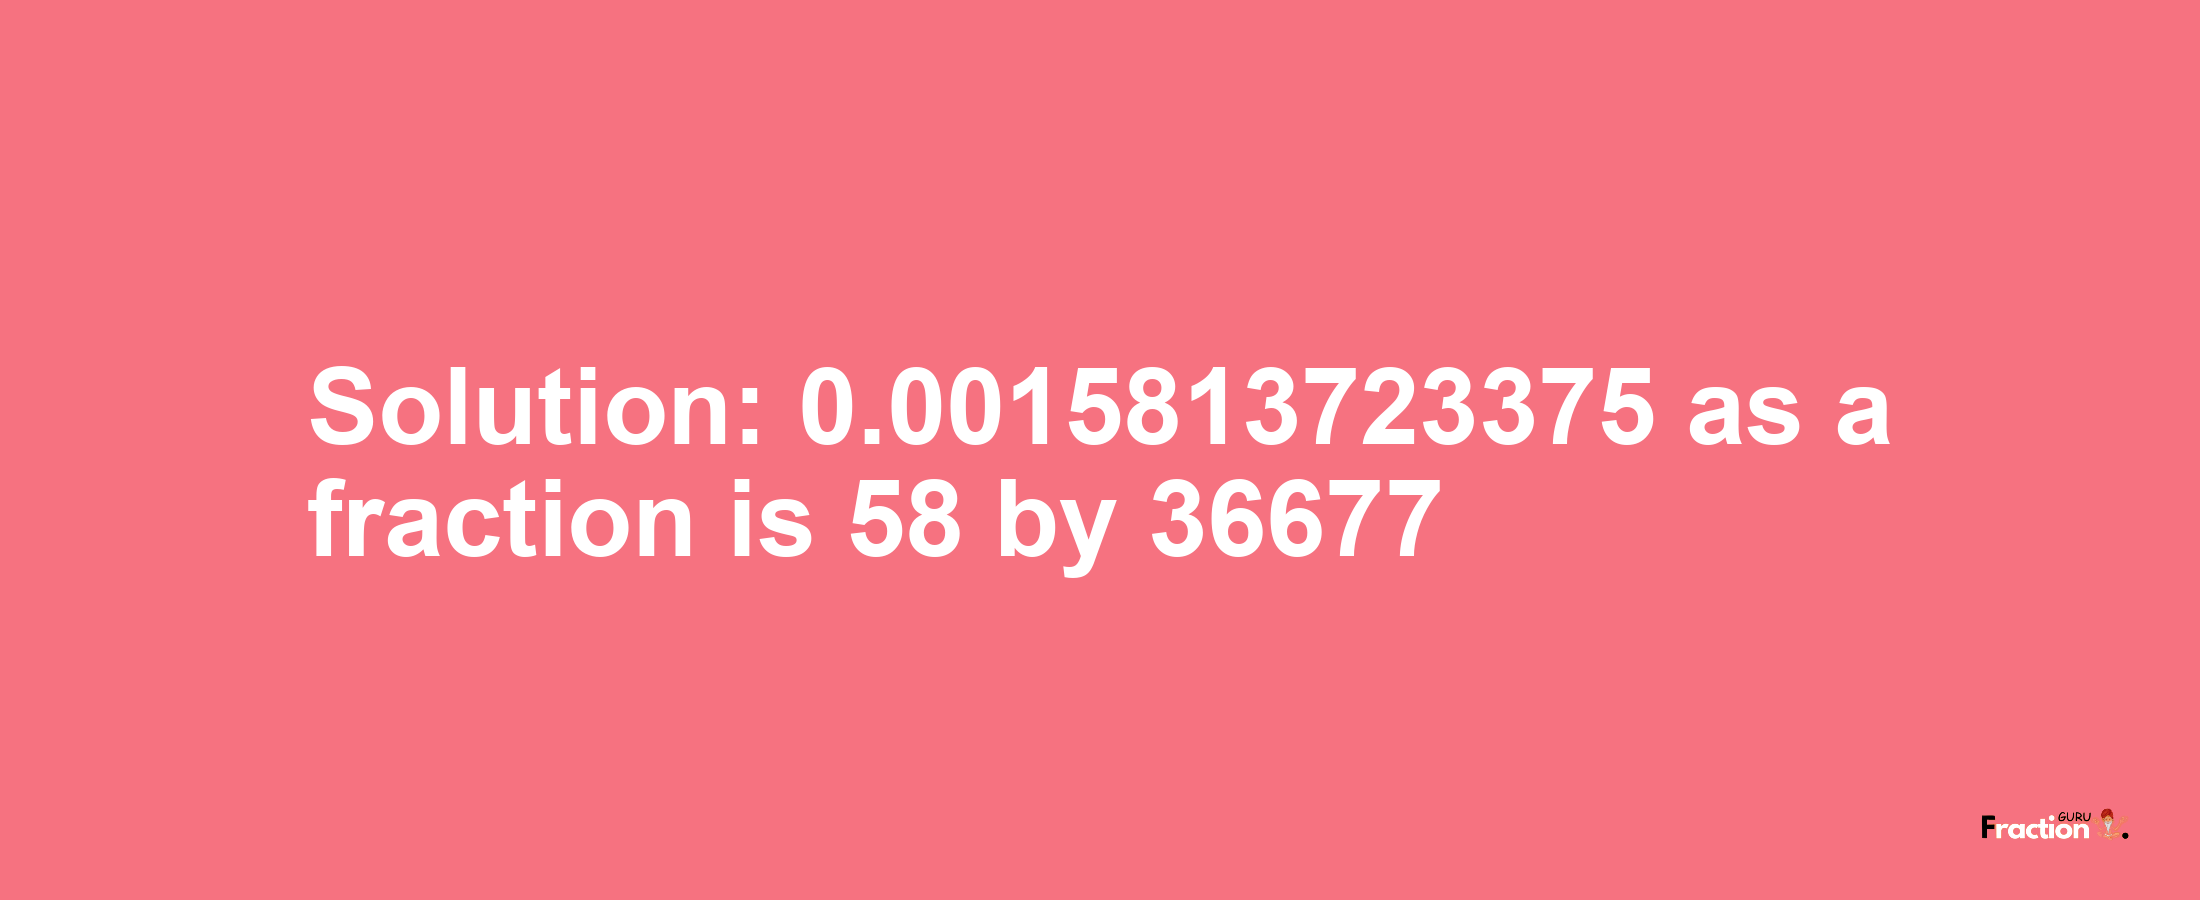 Solution:0.0015813723375 as a fraction is 58/36677